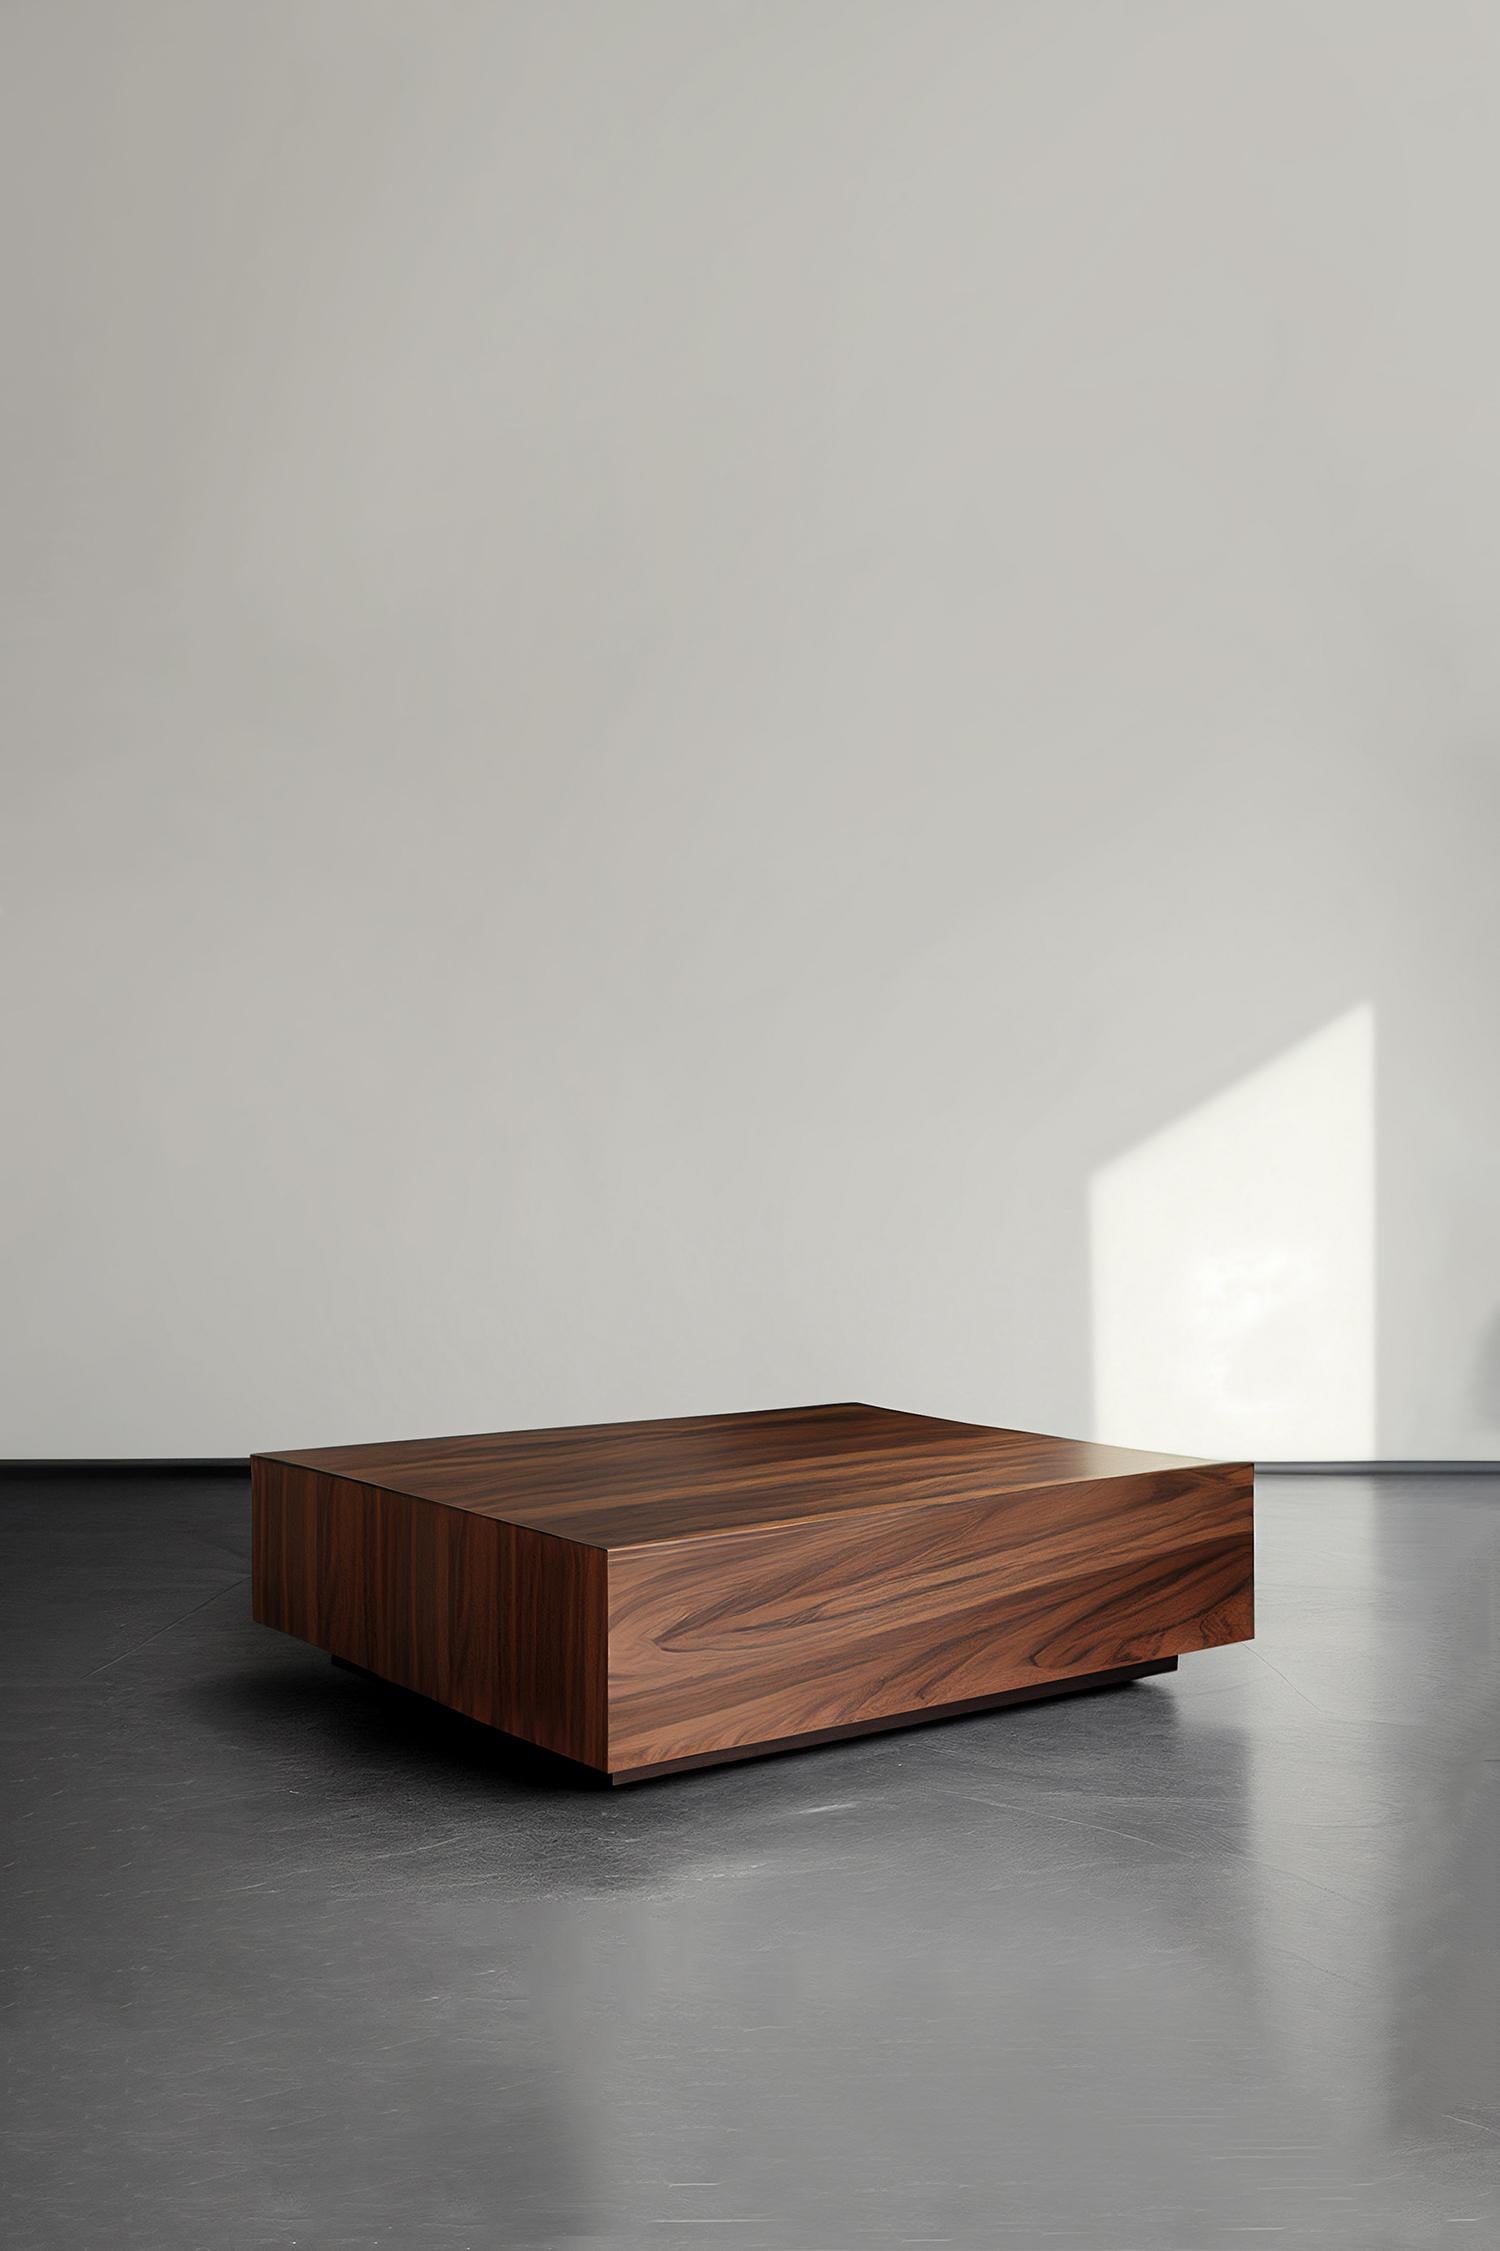 Geometric coffee table, walnut Veneer, Basa by NONO

Square coffee table finished with premium wood veneer, structured with particle board. Finishes available in light oak, walnut, and tinted in gray and black.

The Basa Coffee Table designed by